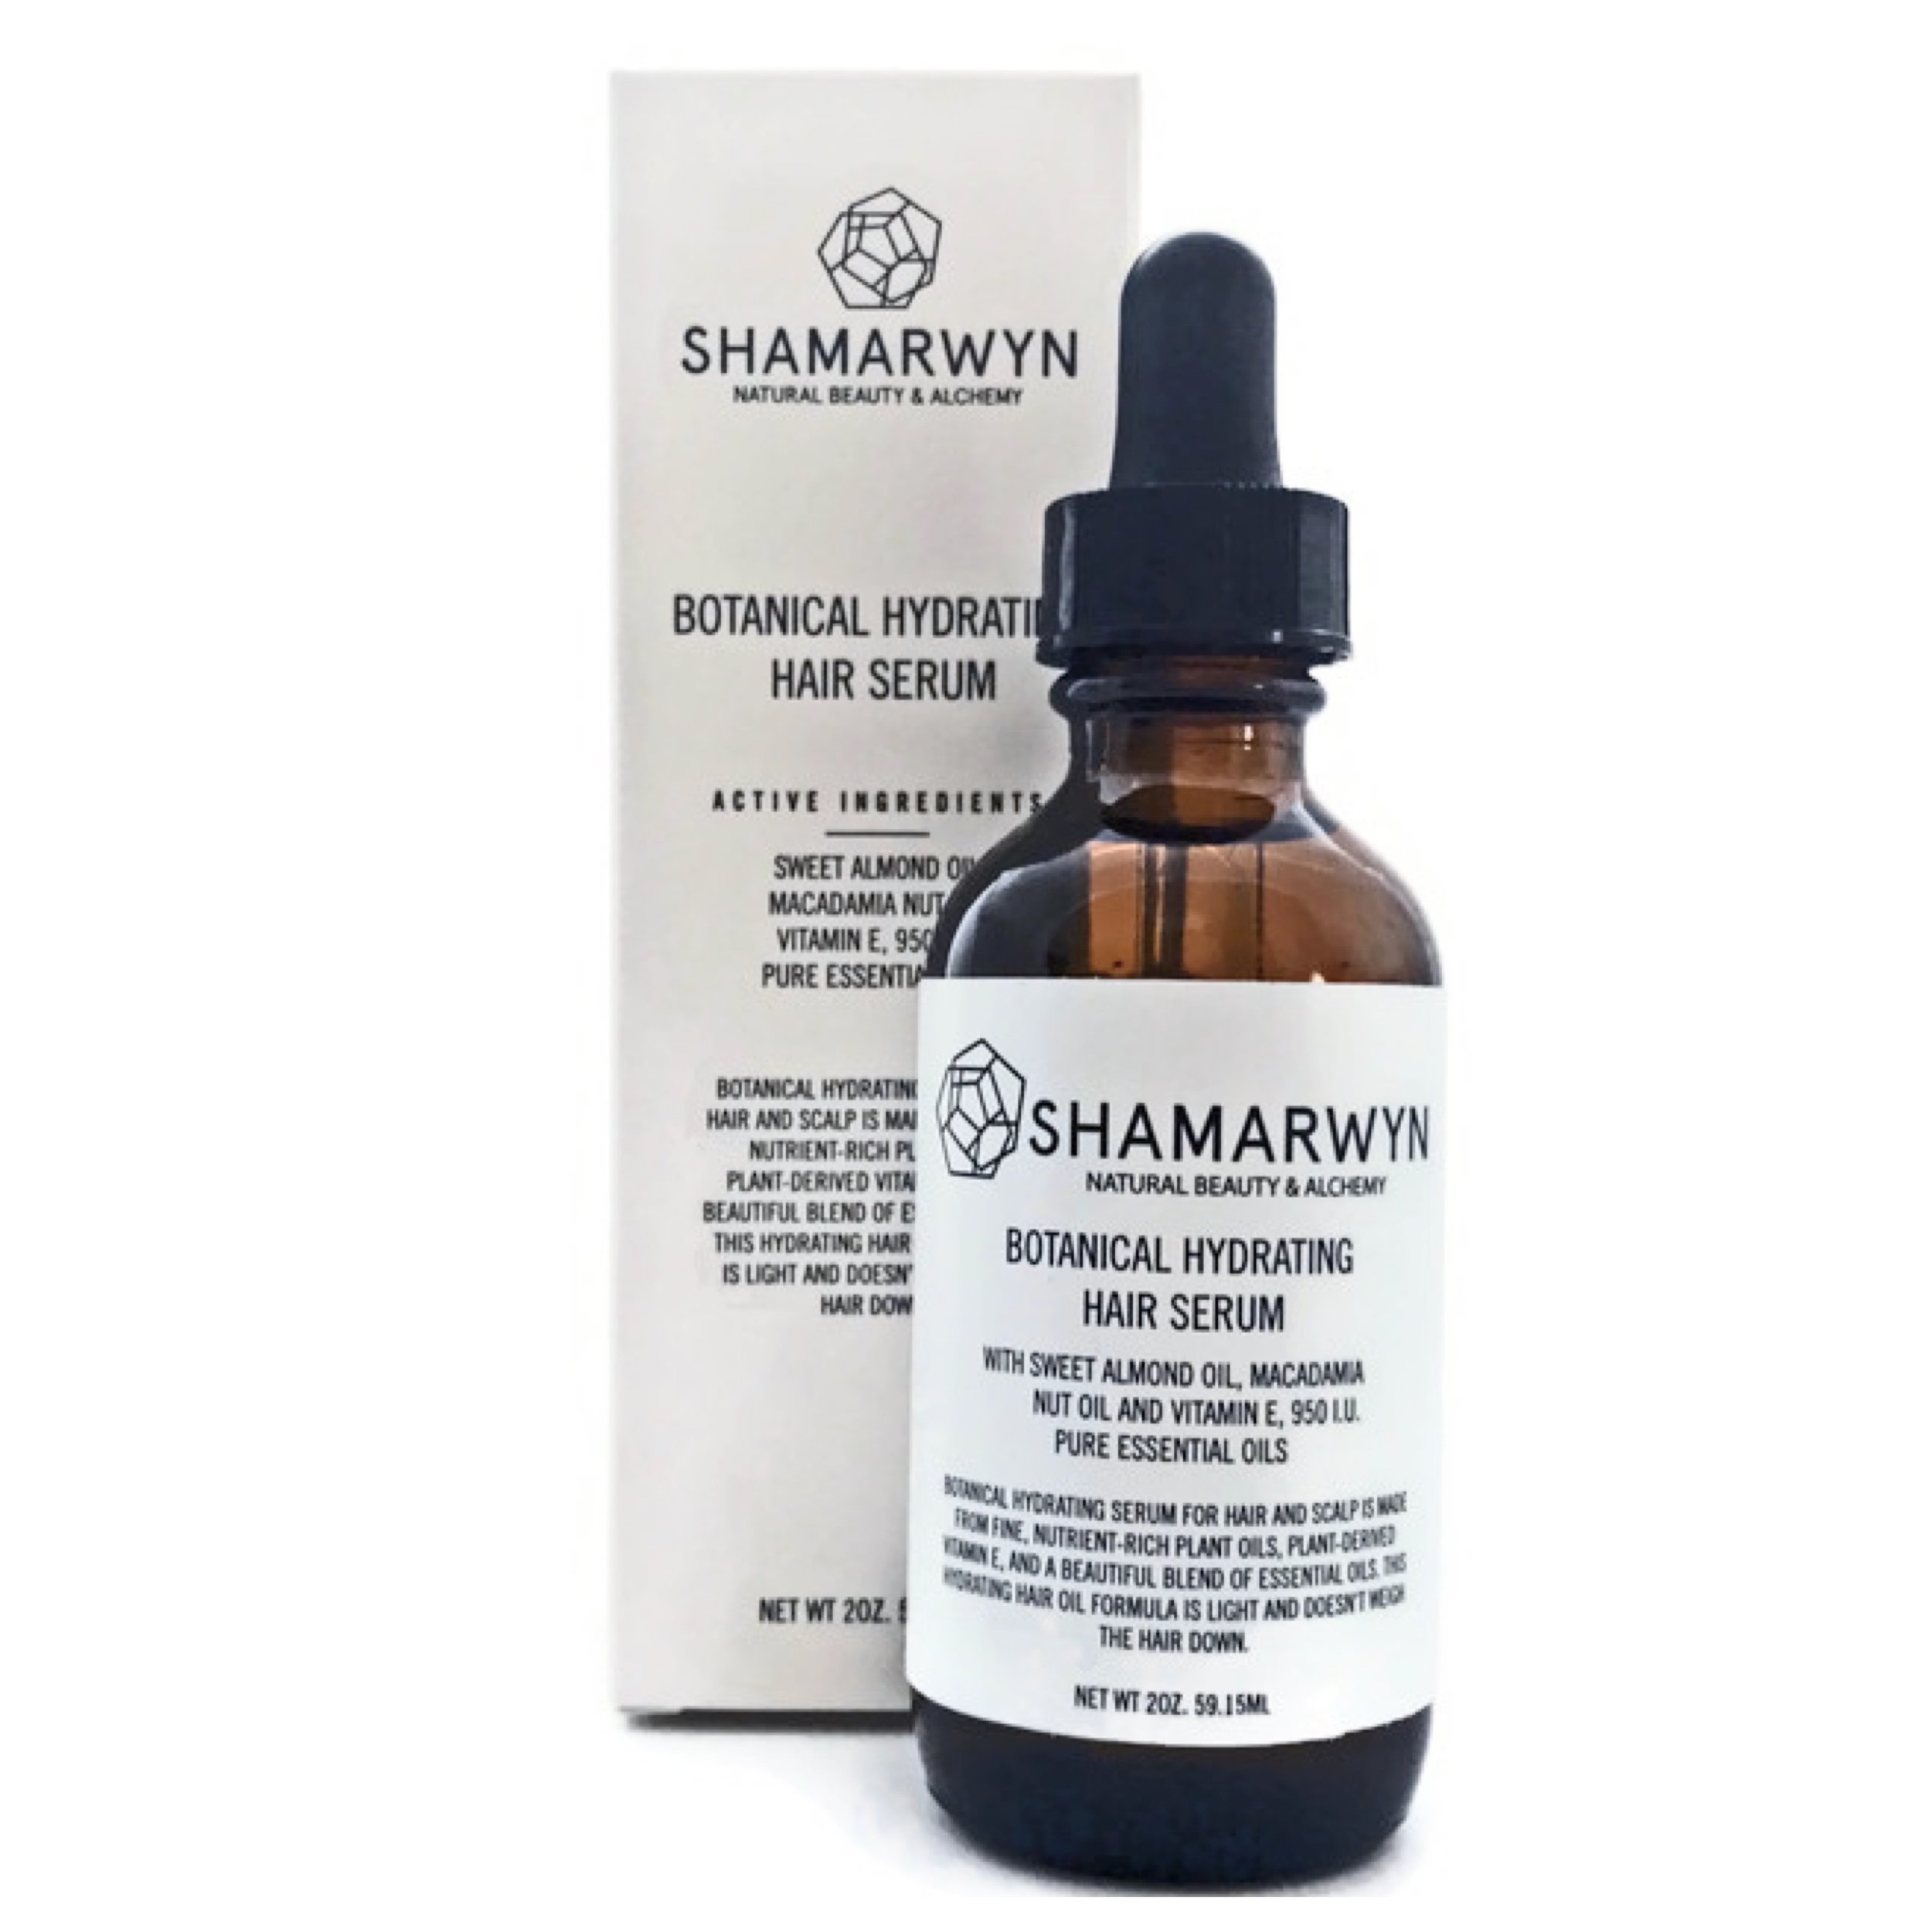 Hydrating Hair Serum for Shiny, Silky Hair with Sweet Almond Oil, Macadamia  Nut Oil, Vitamin E & Pure Essential Oils. Leave-In Conditioner, 2oz —  Shamarwyn